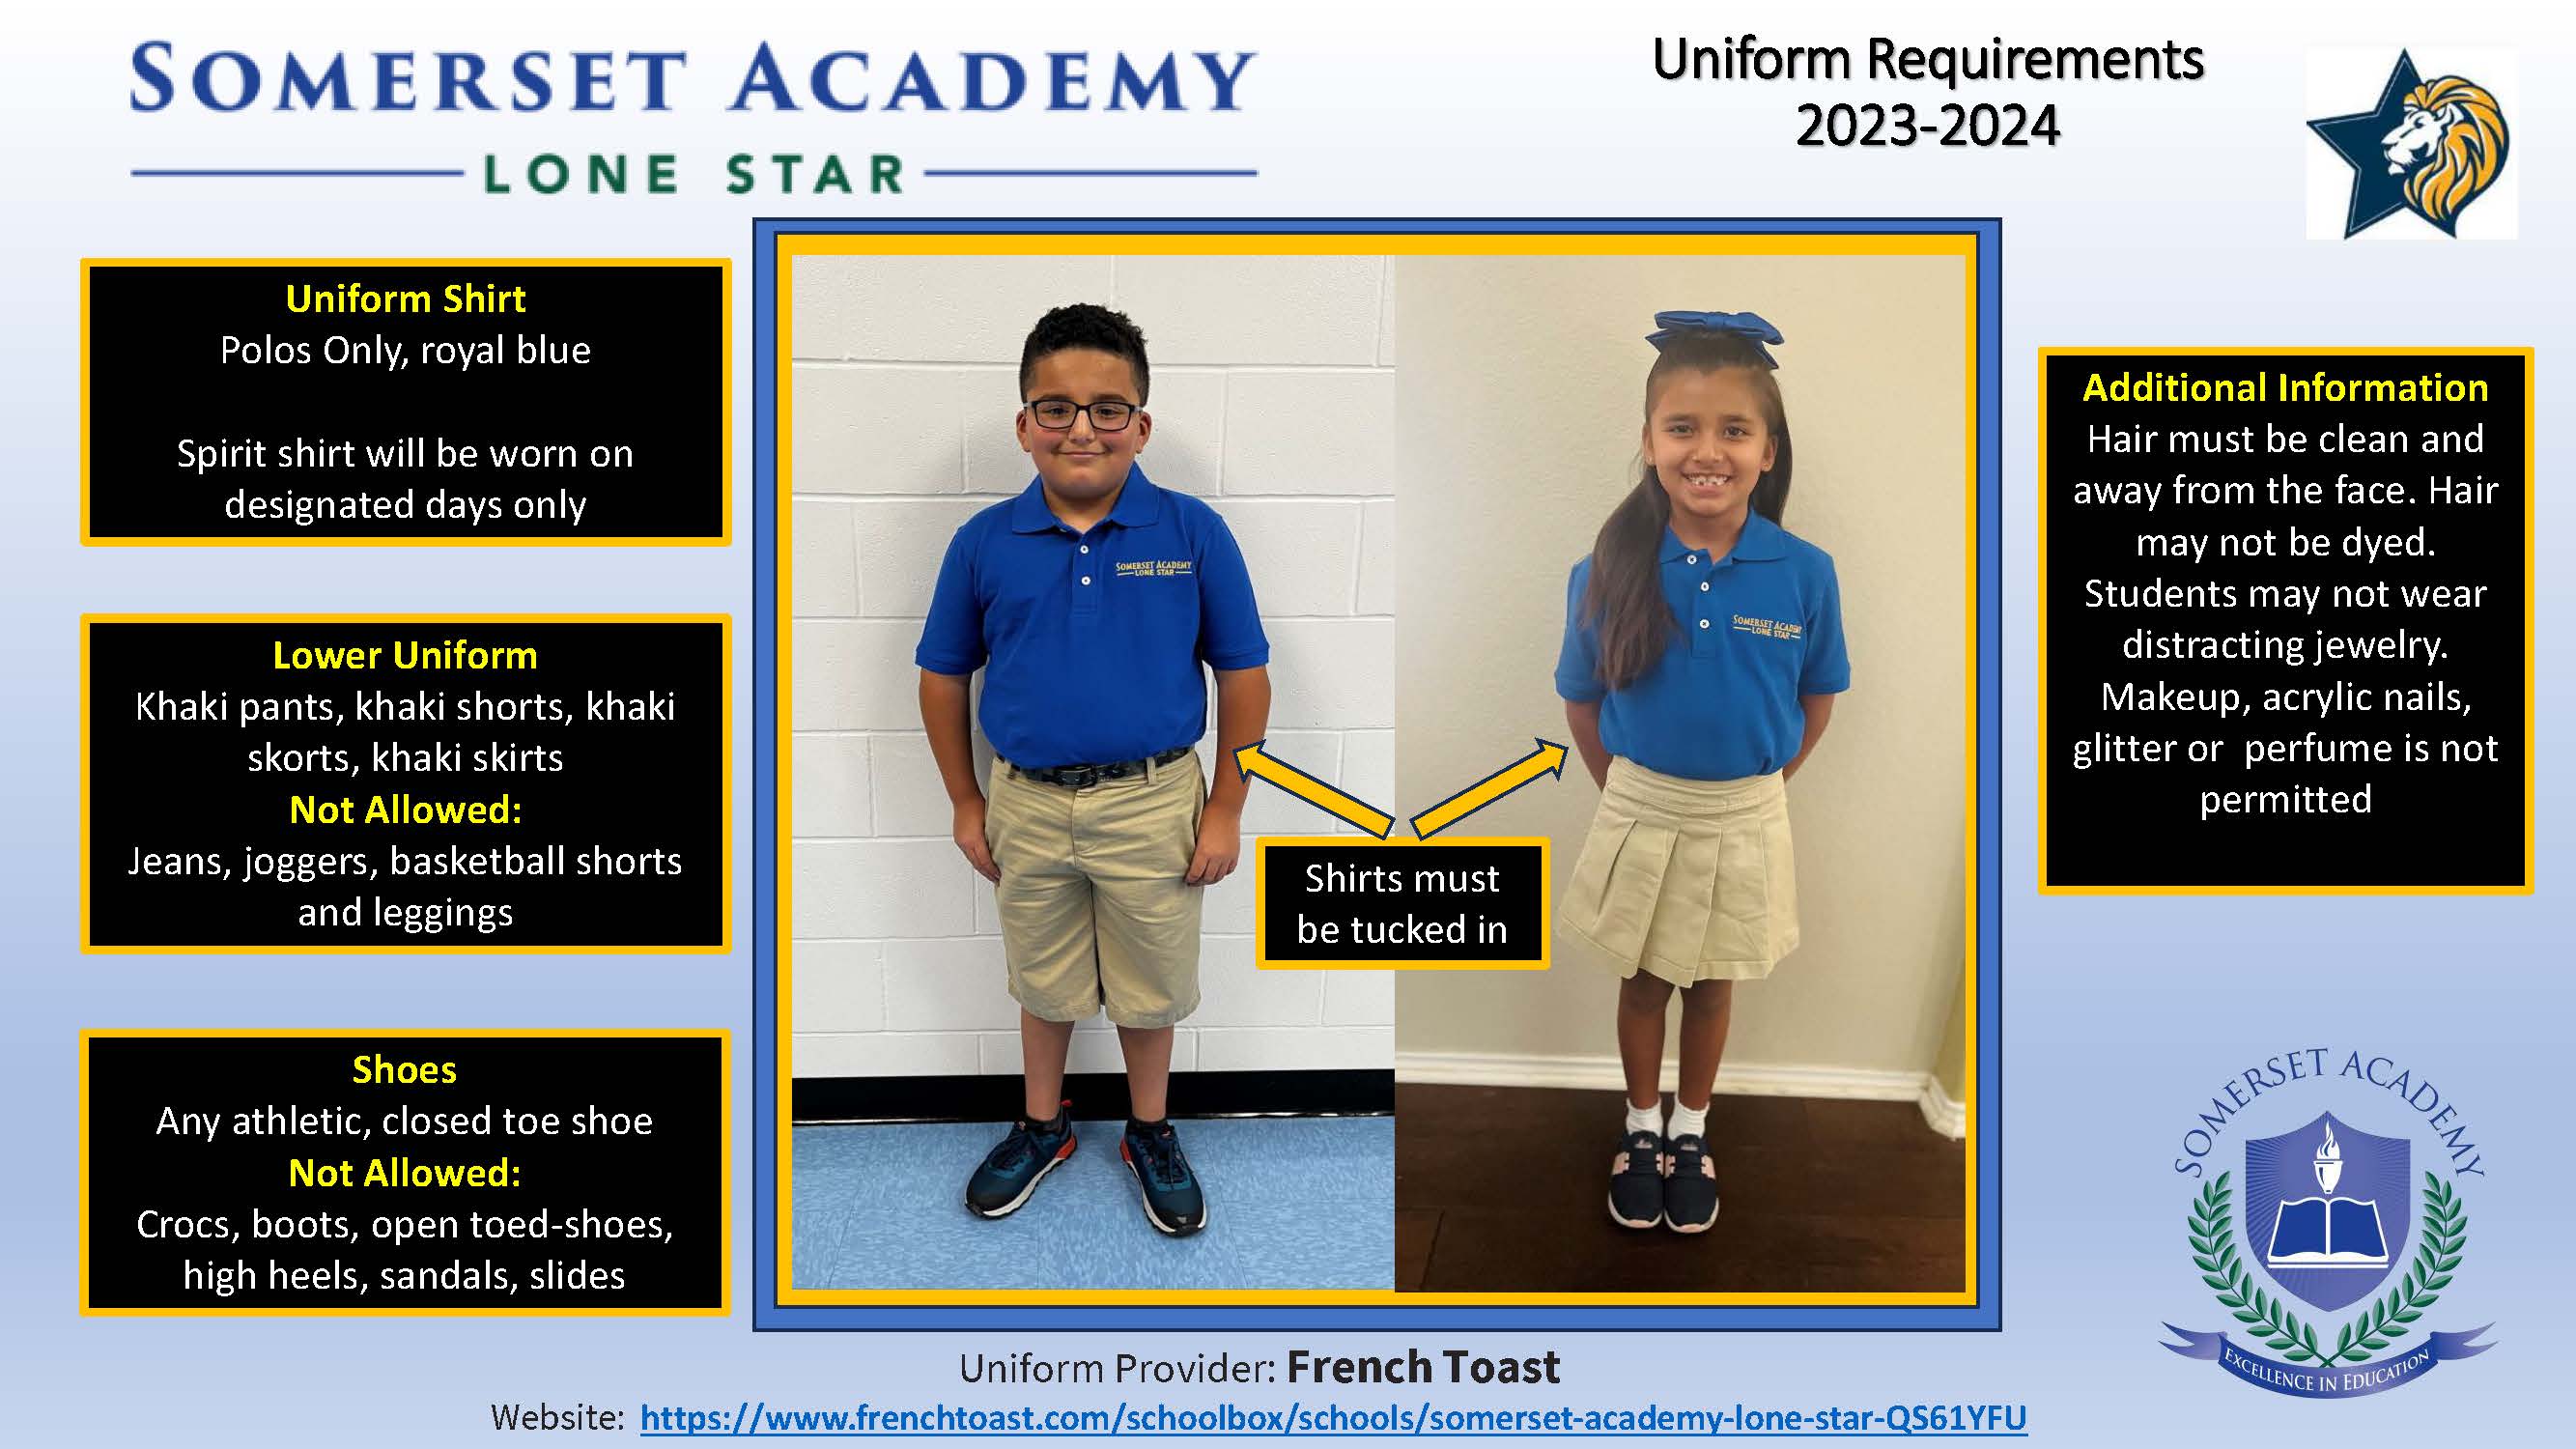 Uniform Requirements for Somerset Academy Lone Star